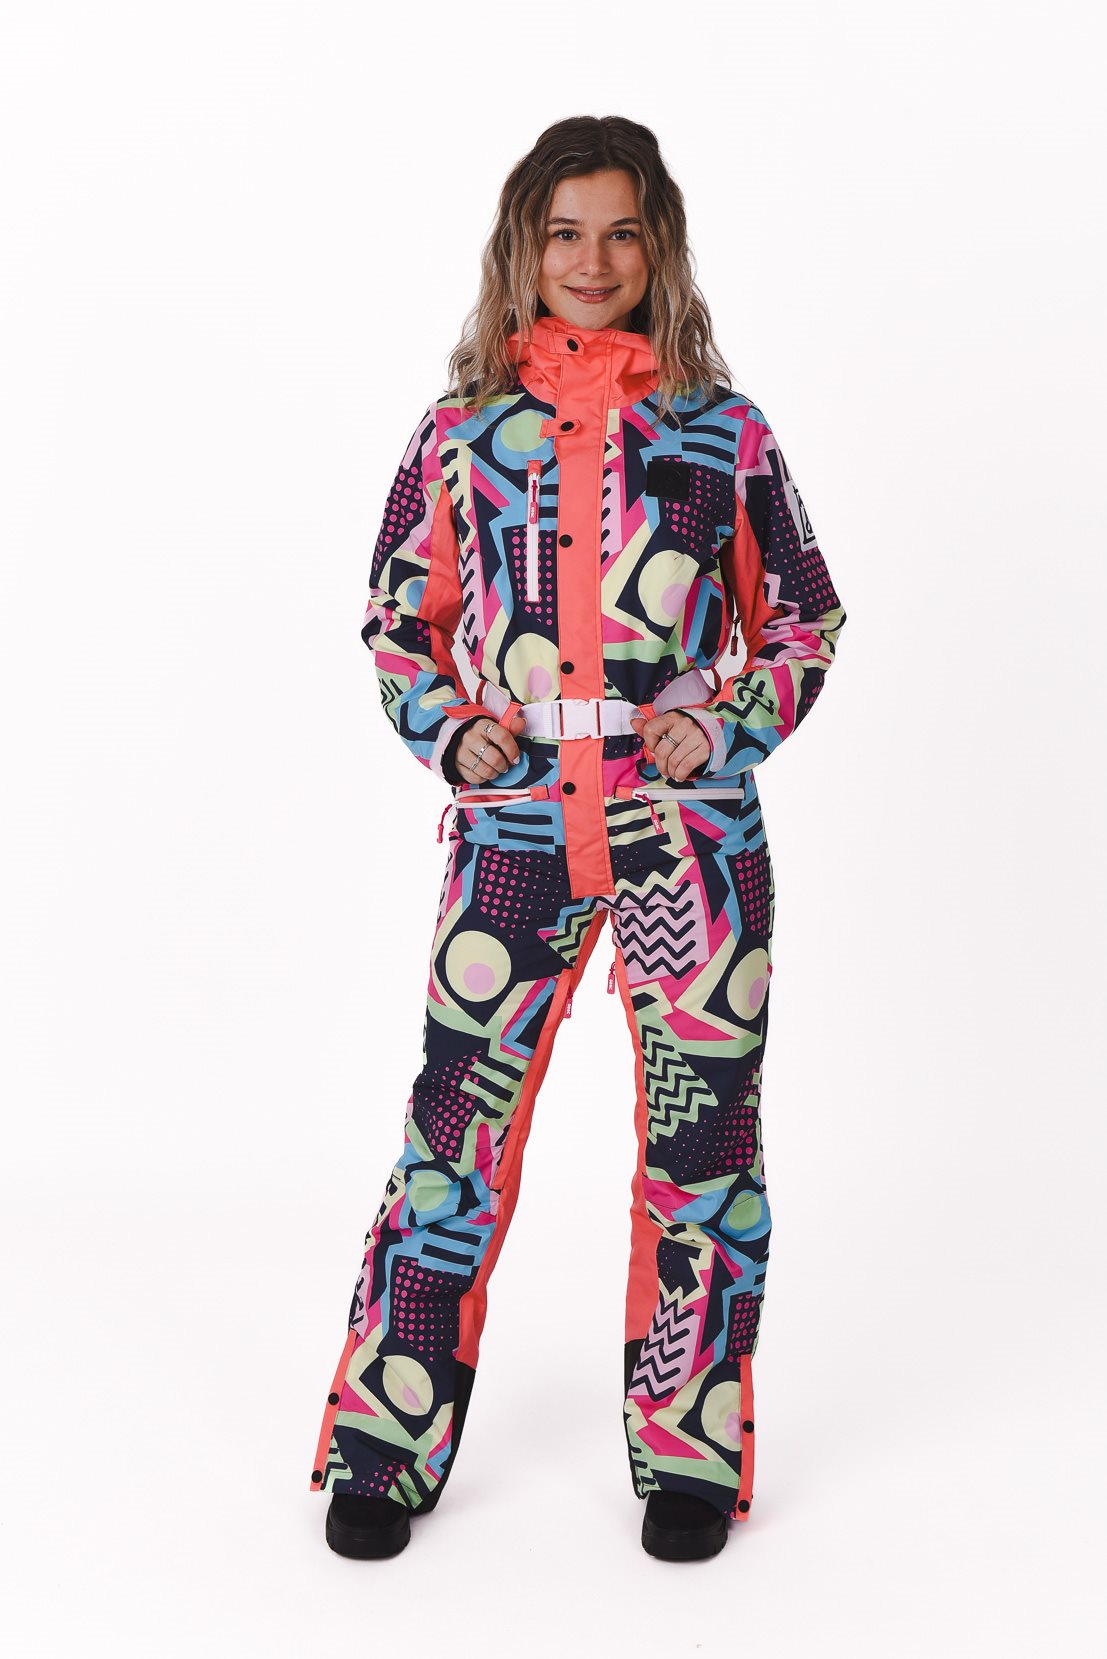 Saved by The Bell Female Ski Suit